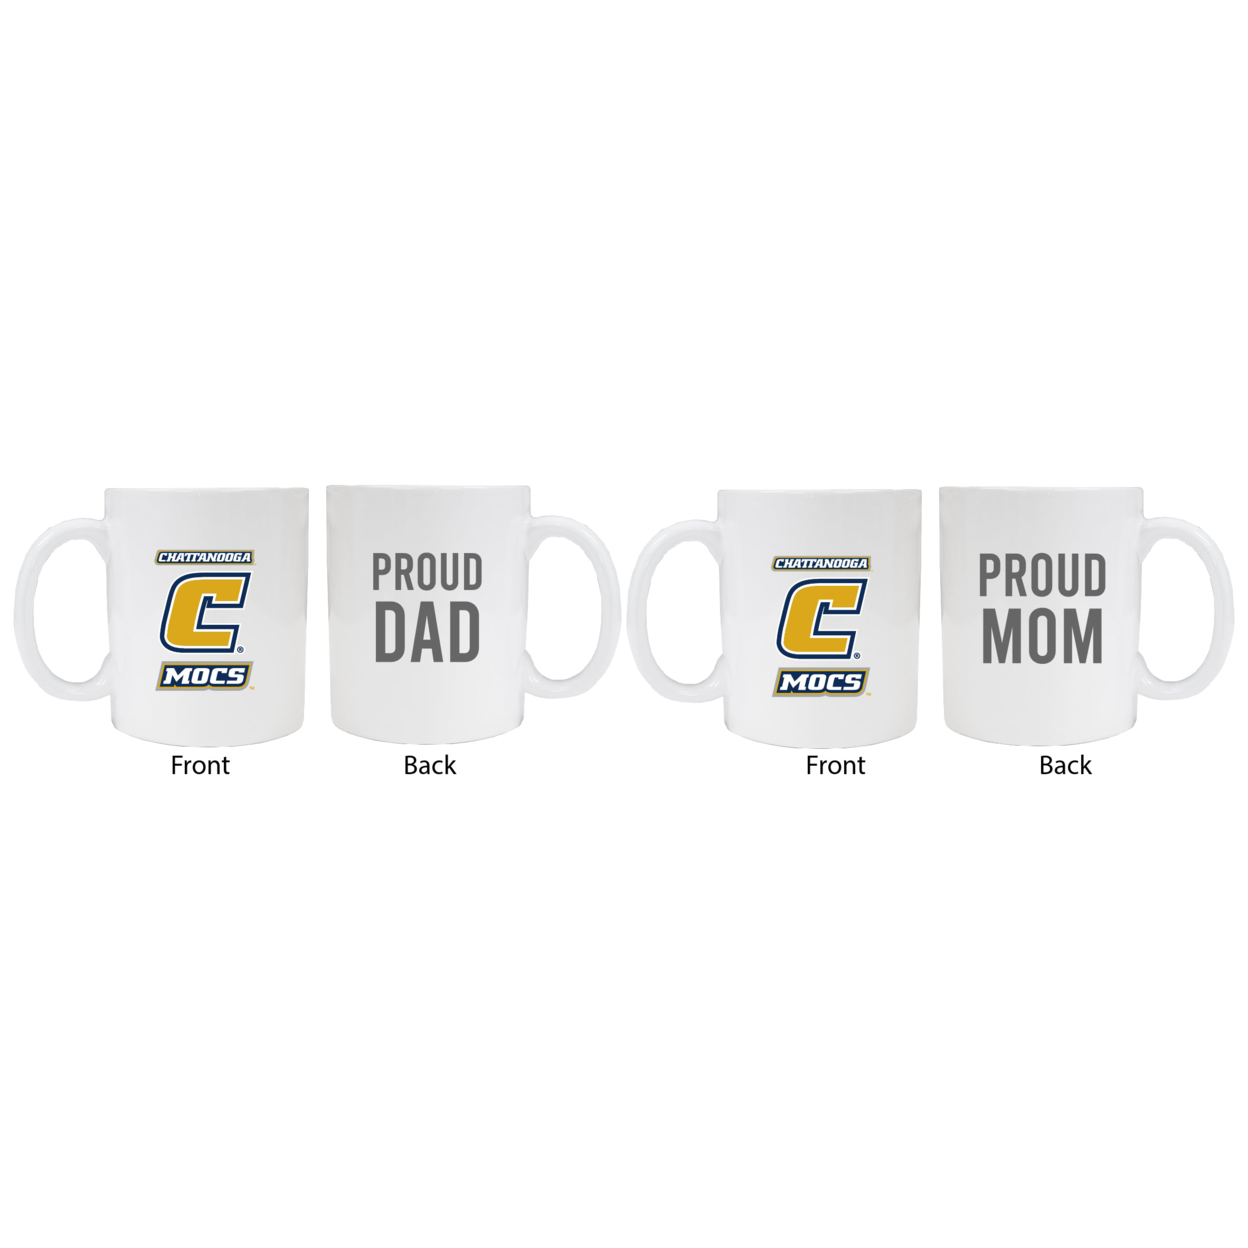 University Of Tennessee At Chattanooga Proud Mom And Dad White Ceramic Coffee Mug 2 Pack (White).